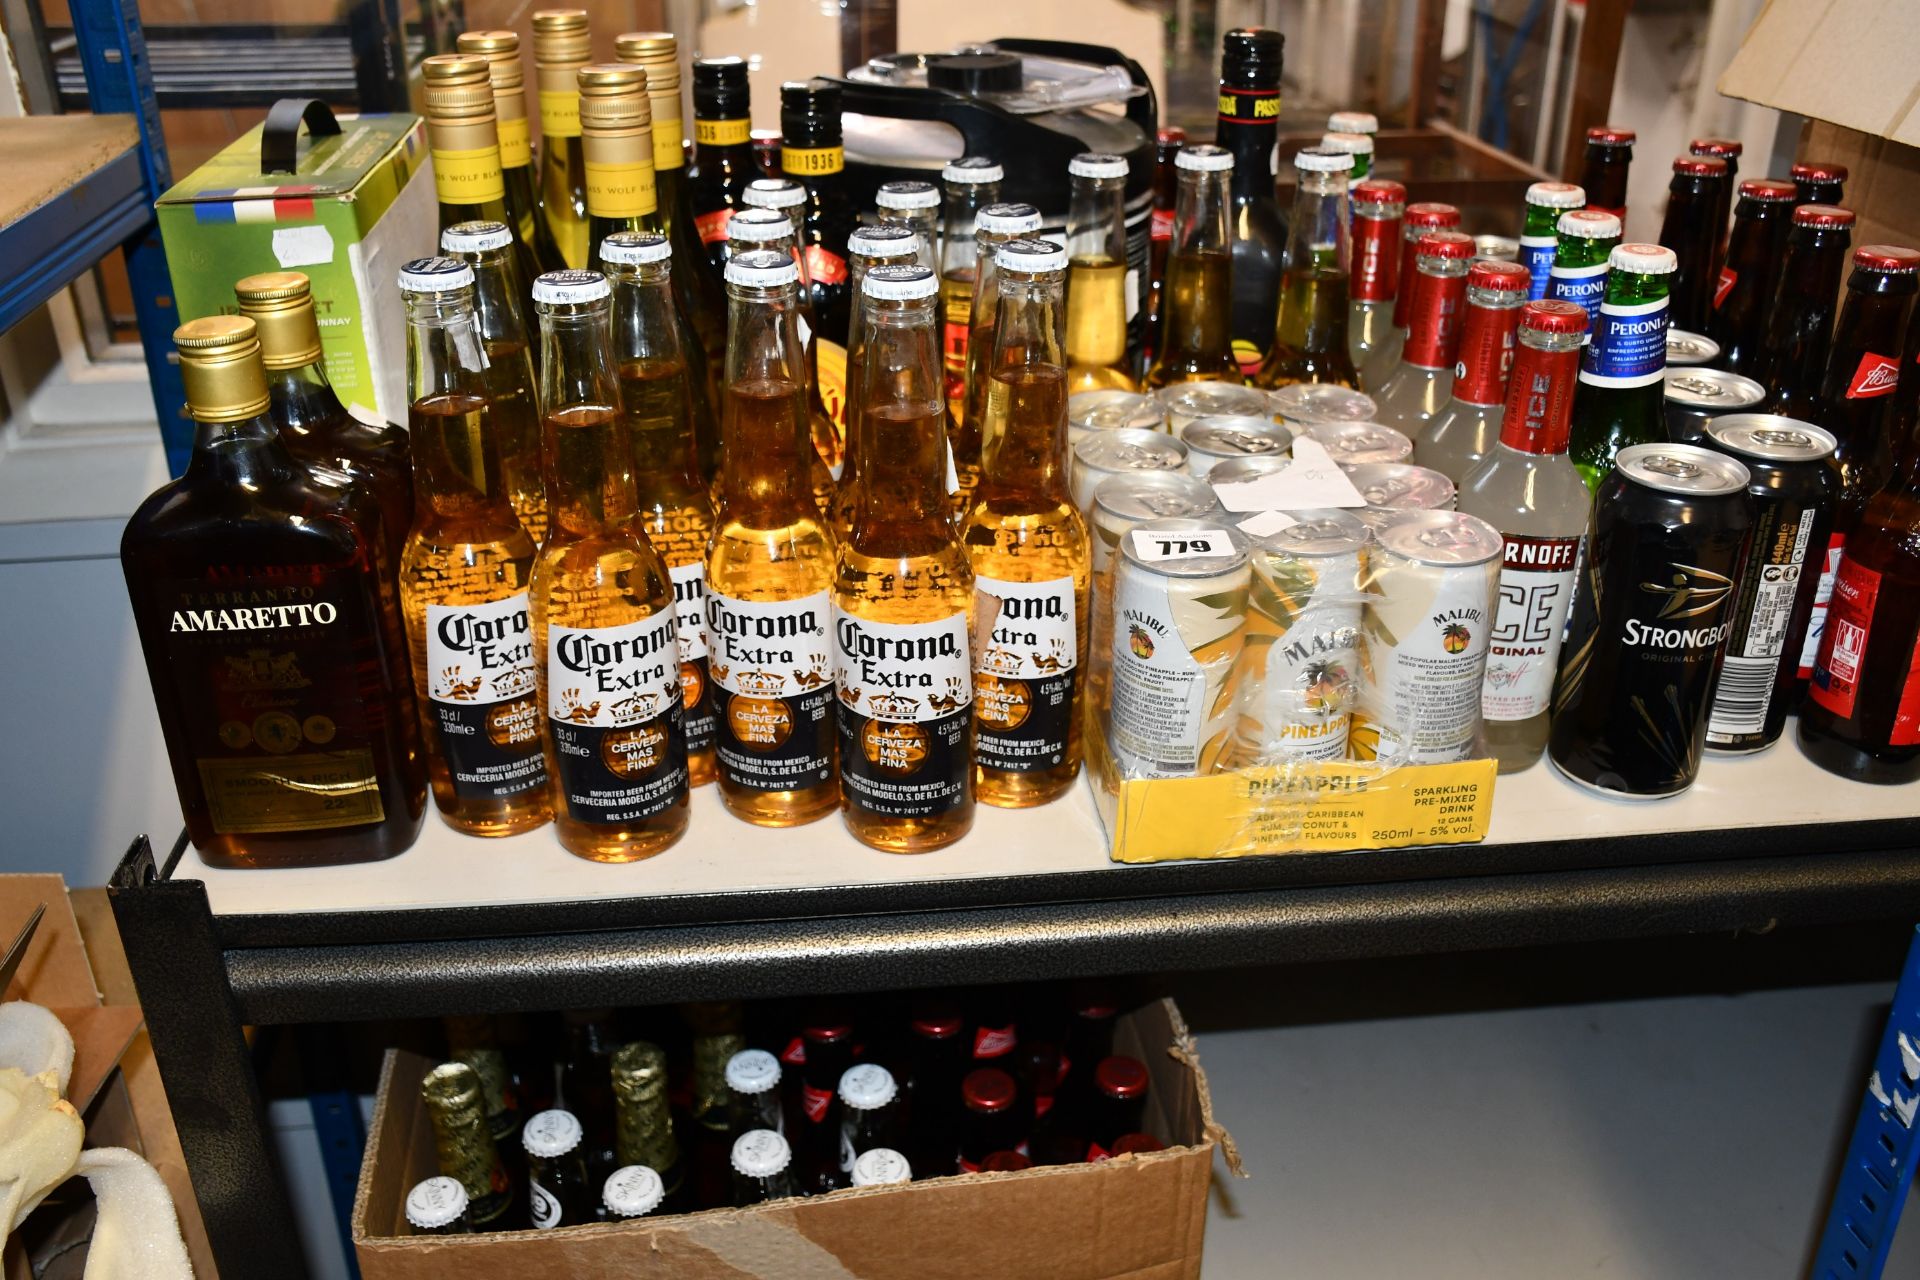 A quantity of alcohol to include Smirnoff Ice, wine and Malibu (Over 18s only).